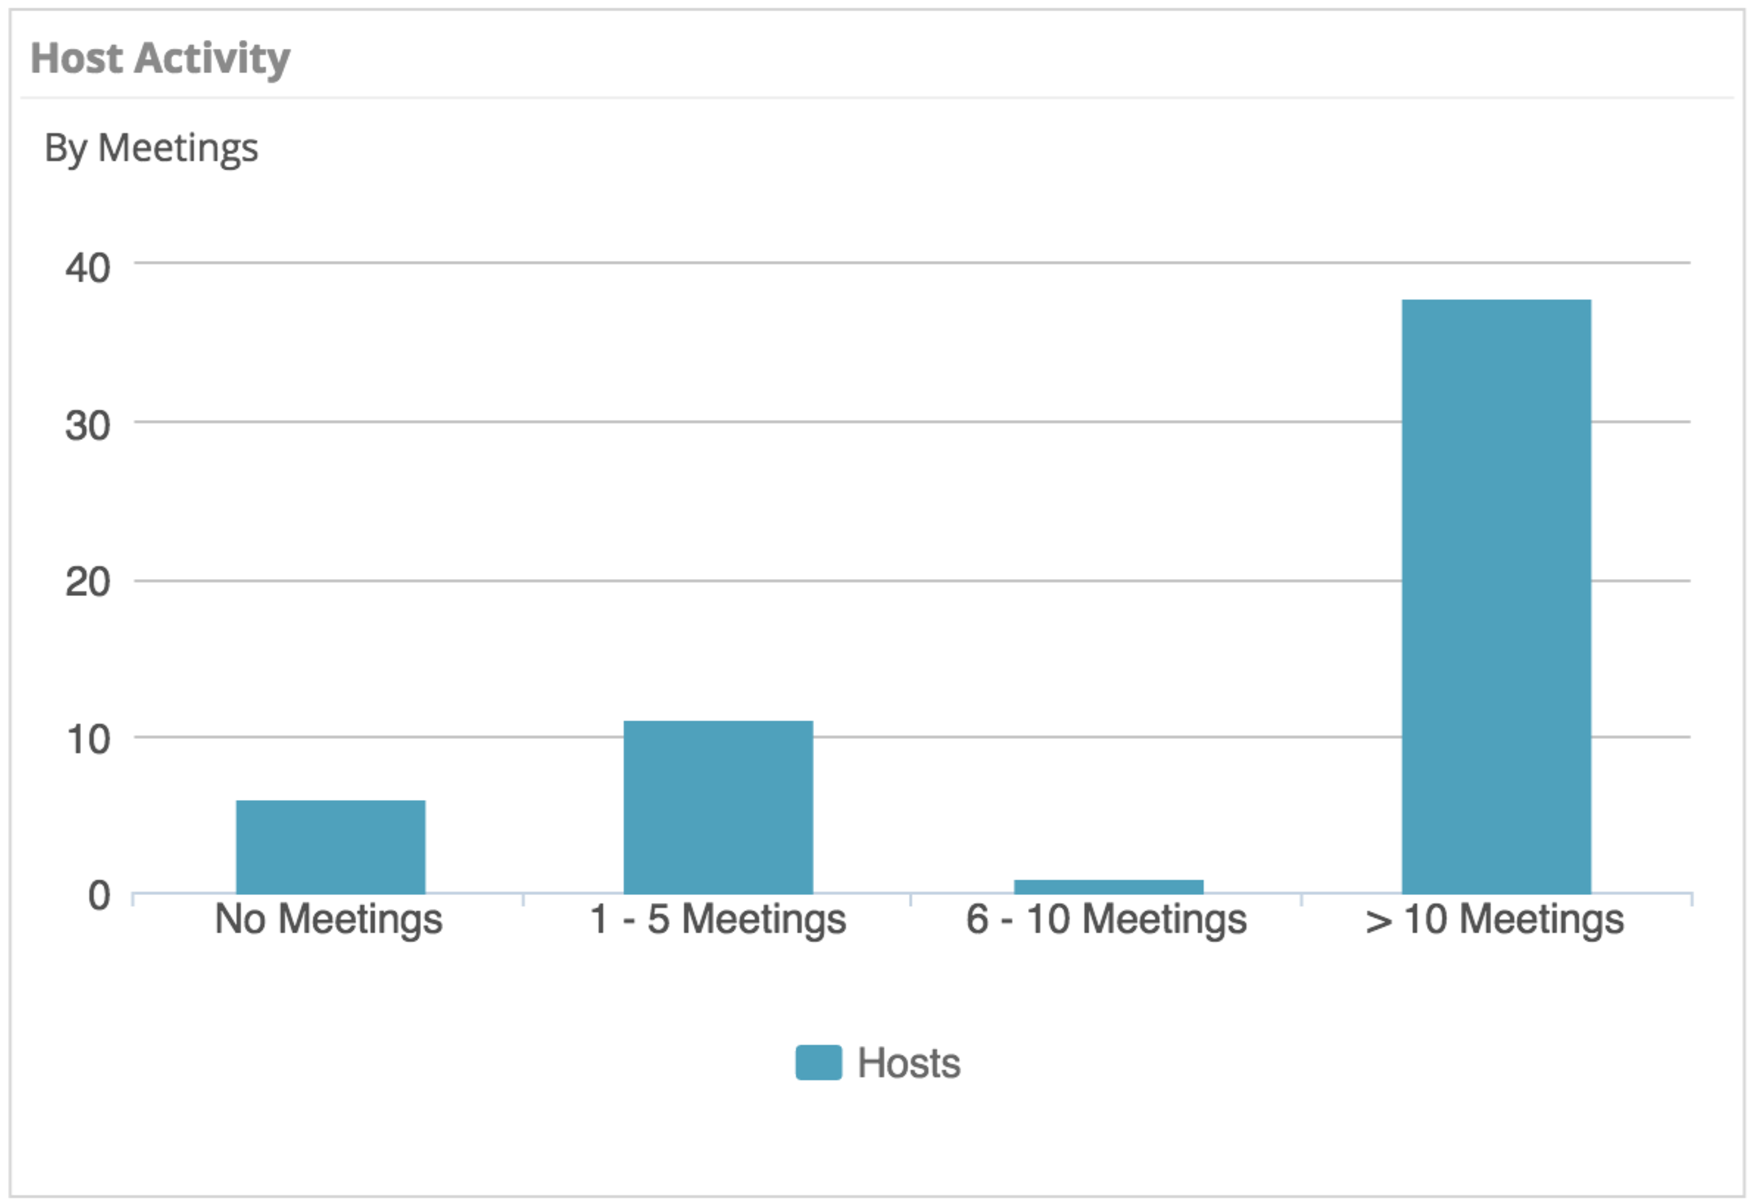 Video conferencing meeting host activity chart